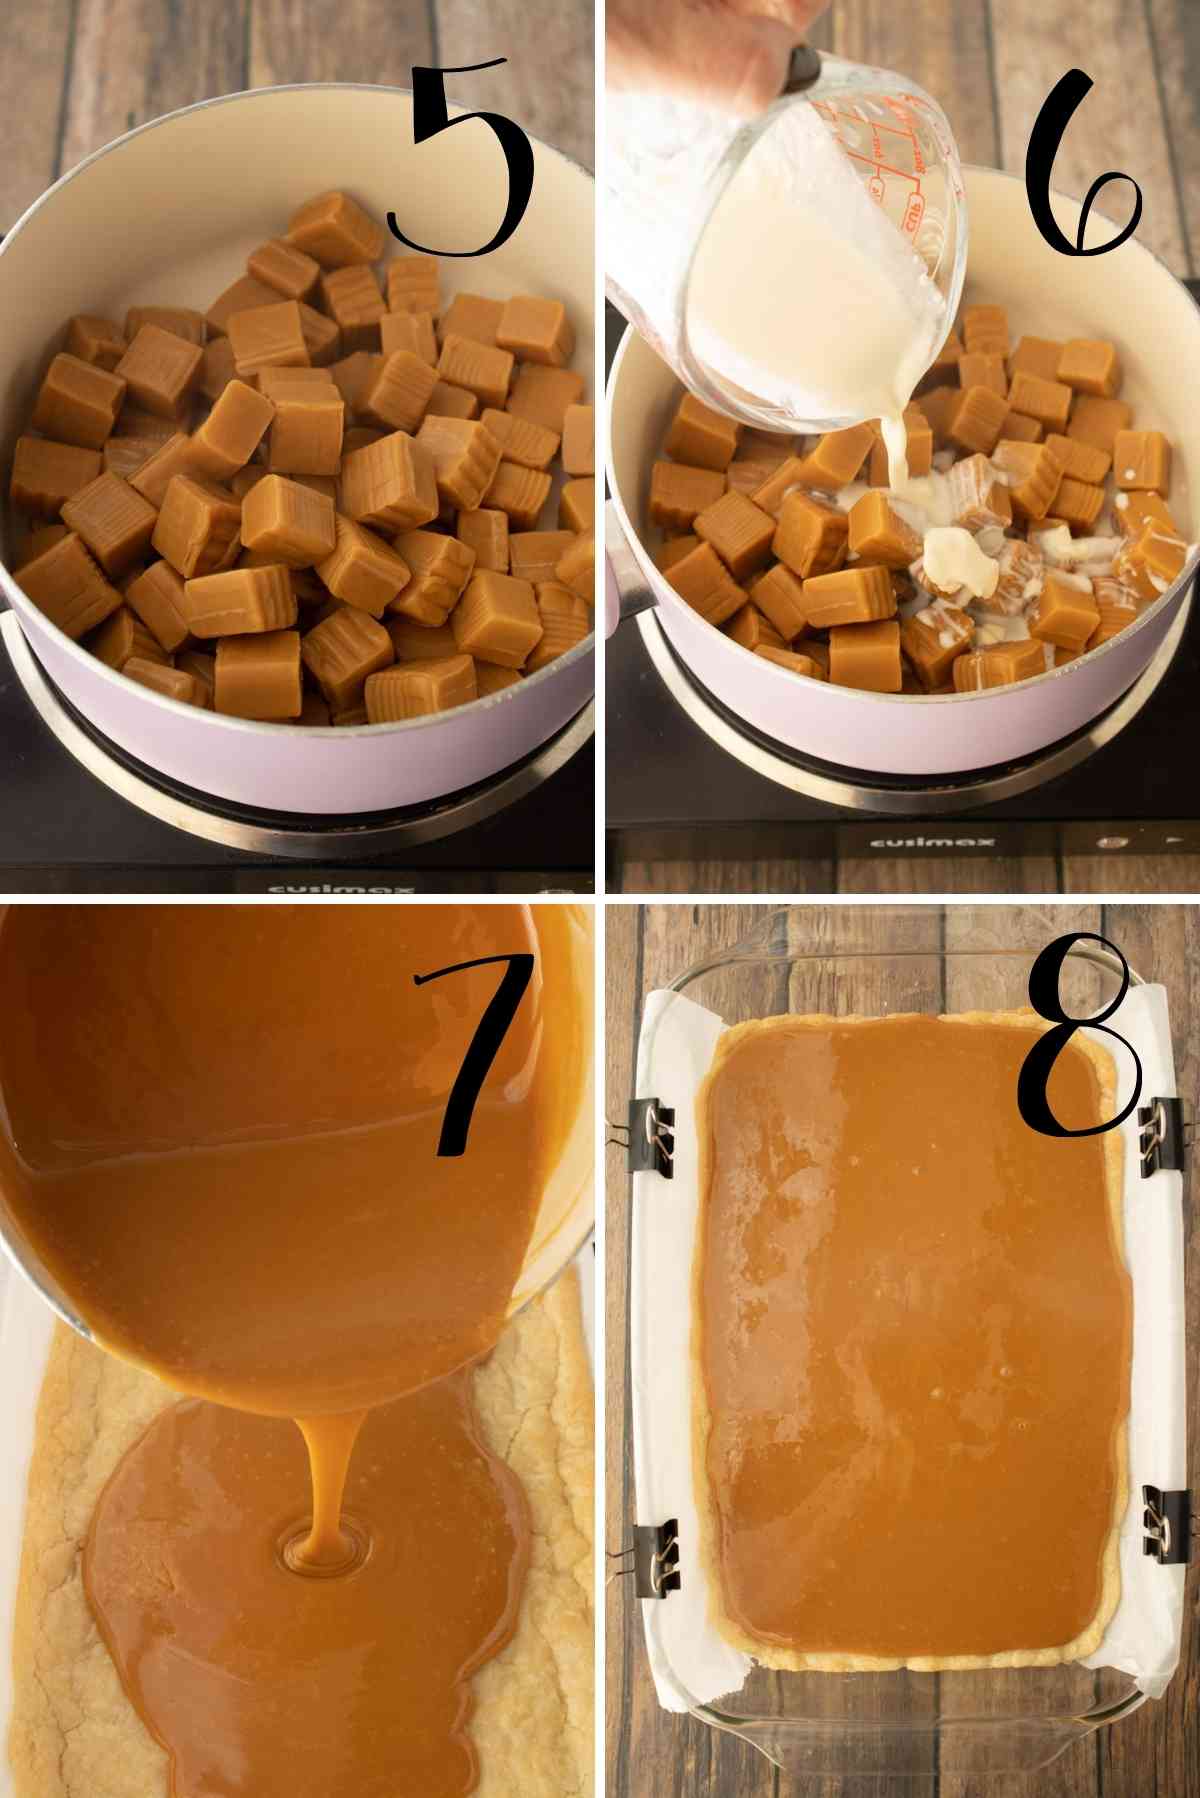 Make homemade caramel to pour over the cookie crust.